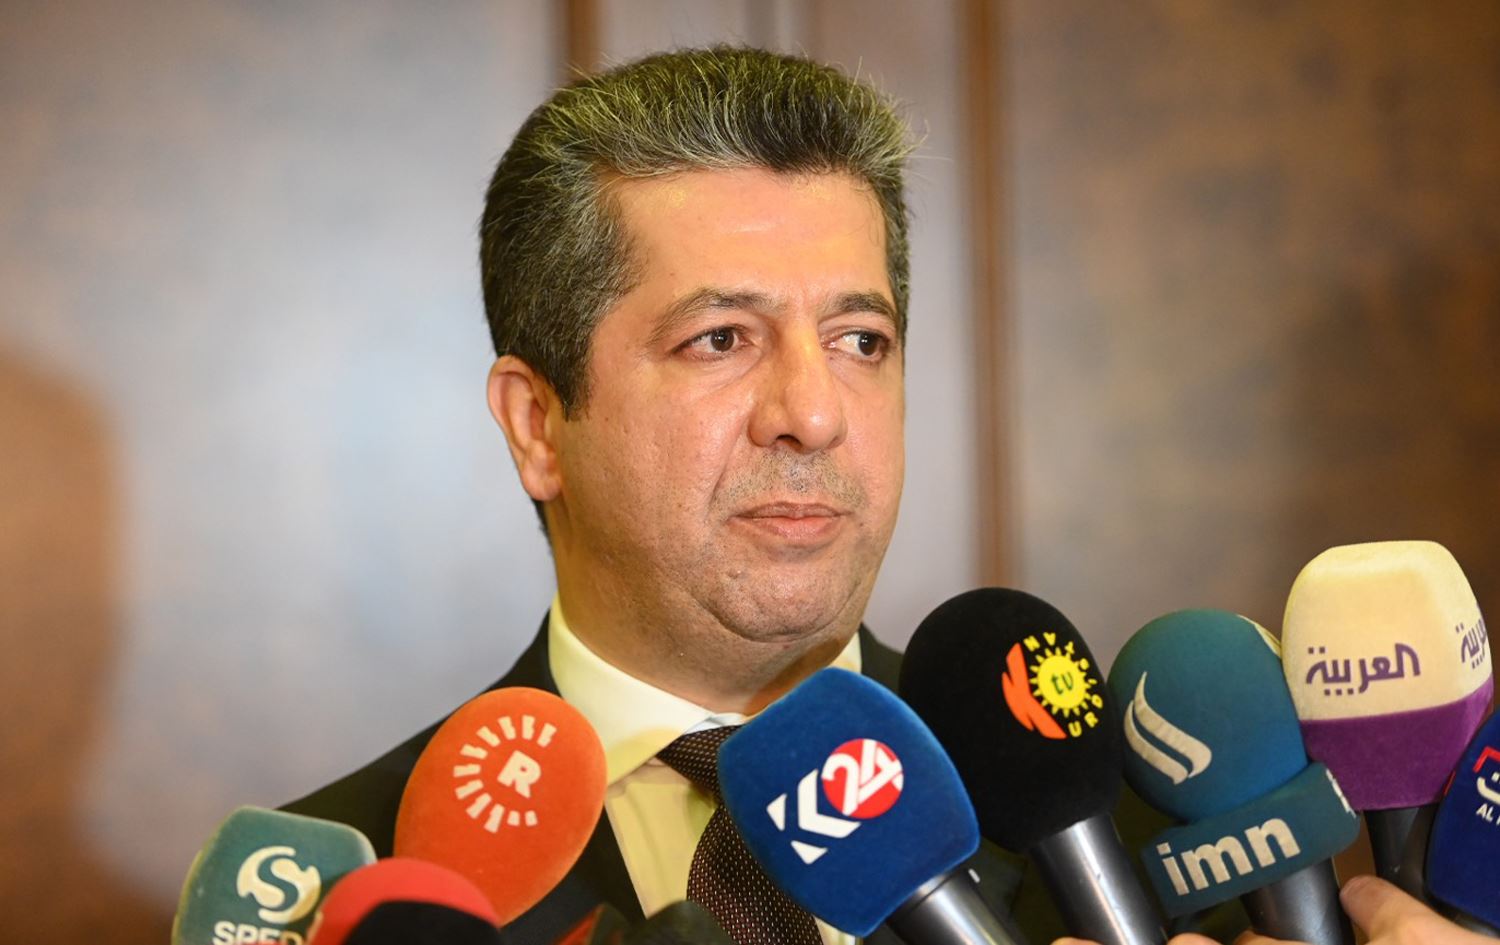 Masrour Barzani: KRG is doing its utmost to resolve the issues with Baghdad